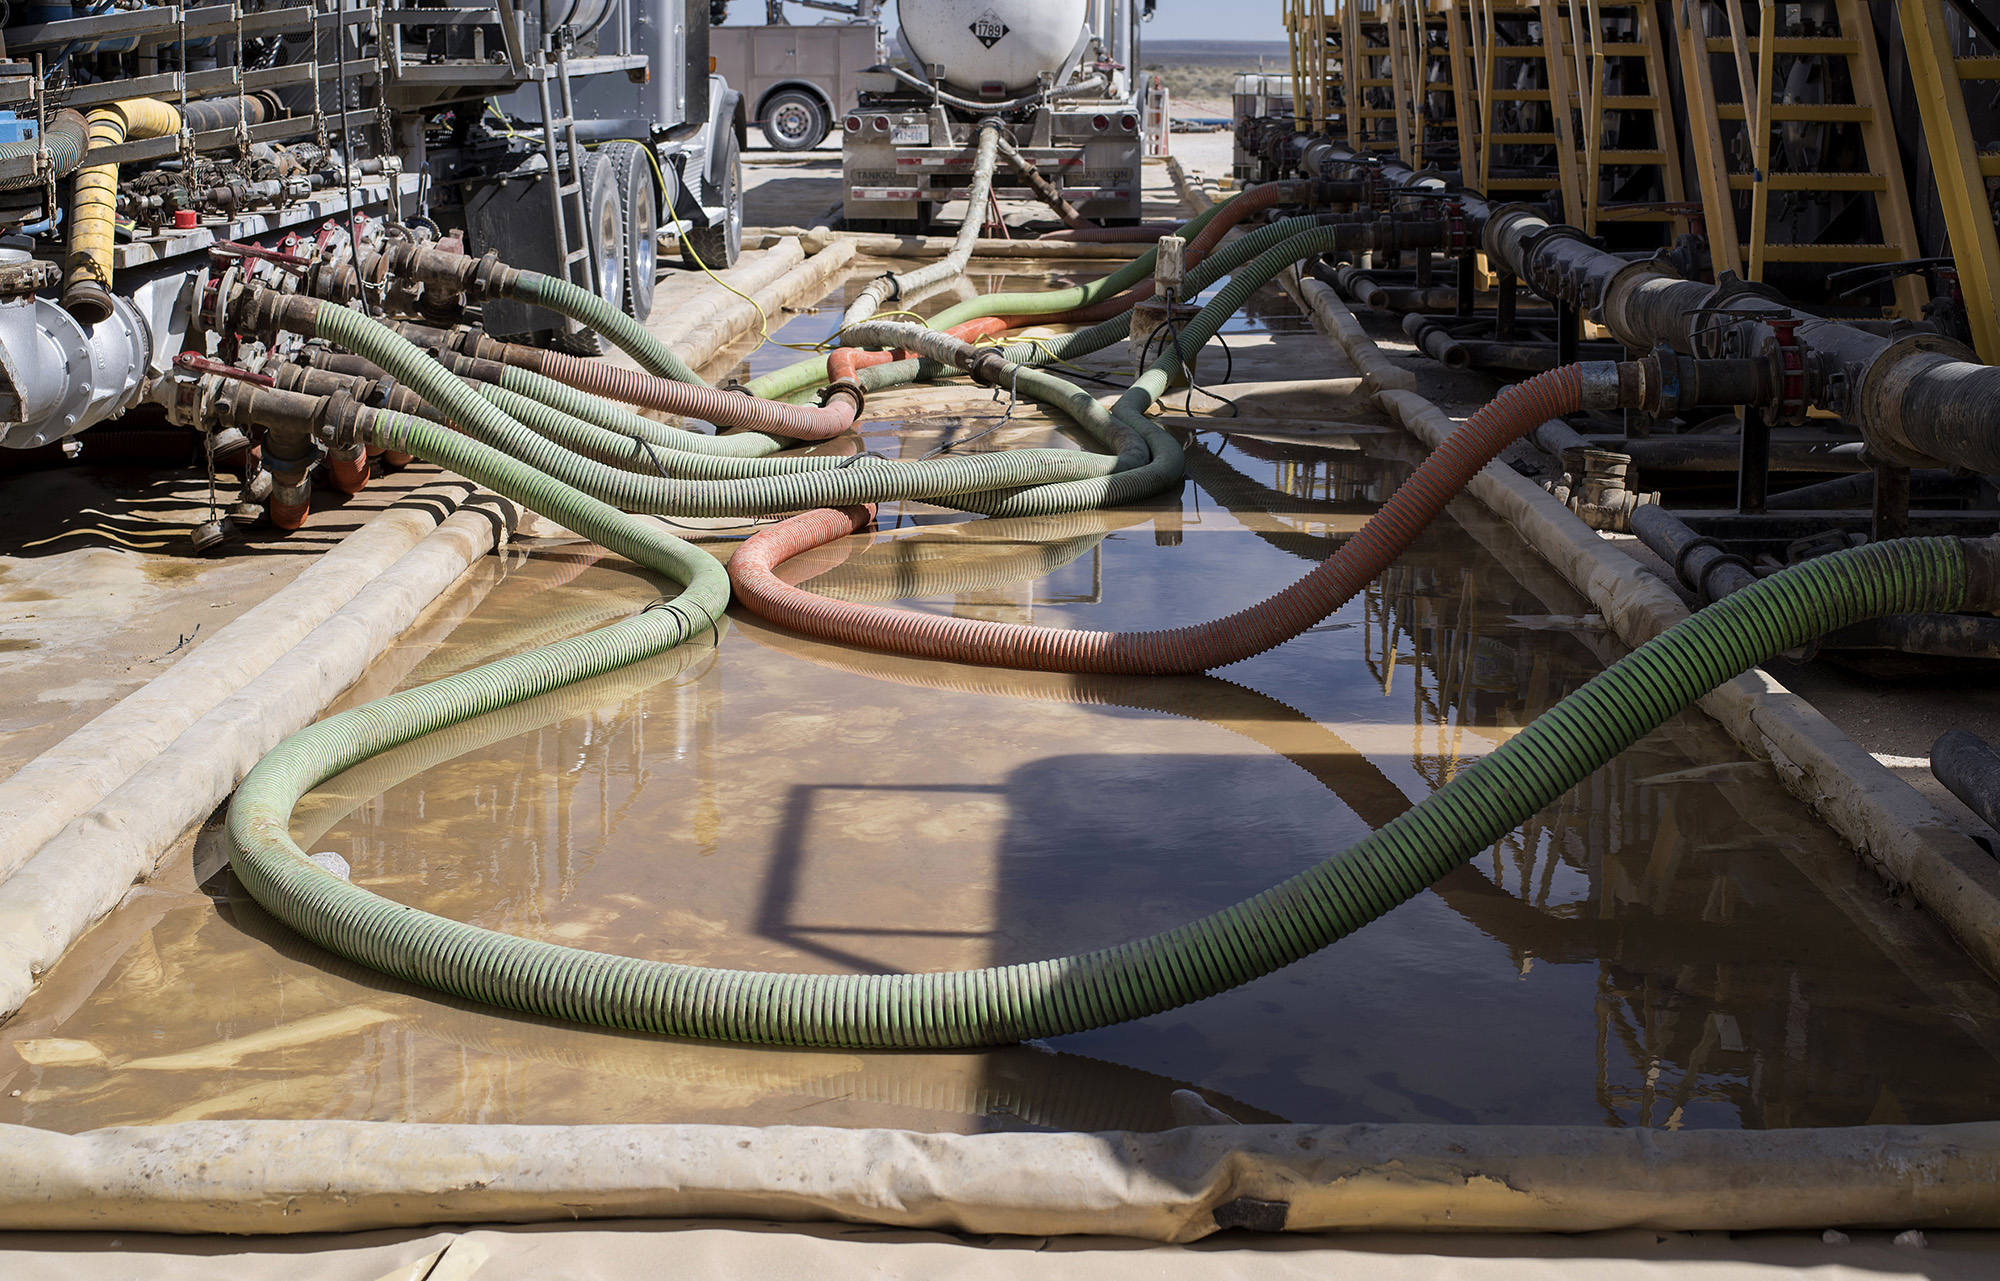 Hoses carry water to hydraulic fracking machinery at at a site near Mentone, Texas.